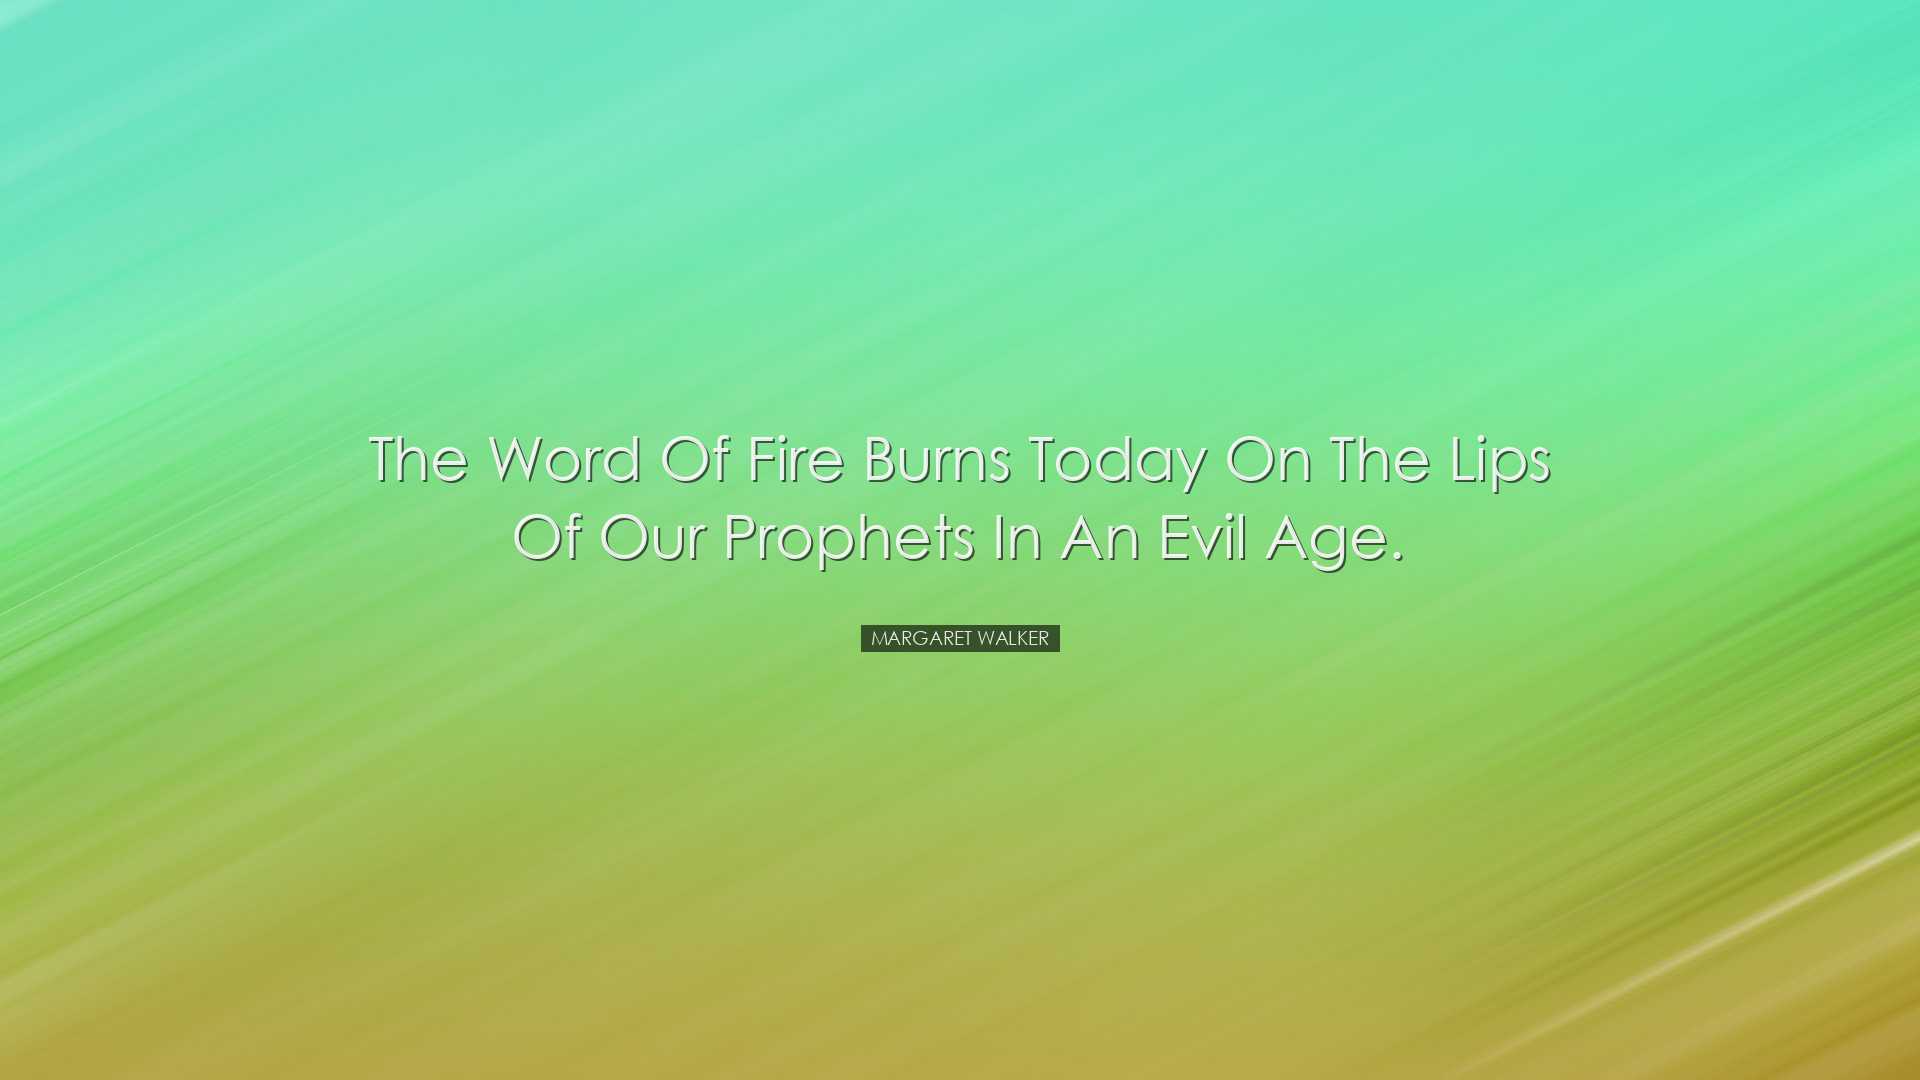 The Word of fire burns today On the lips of our prophets in an evi